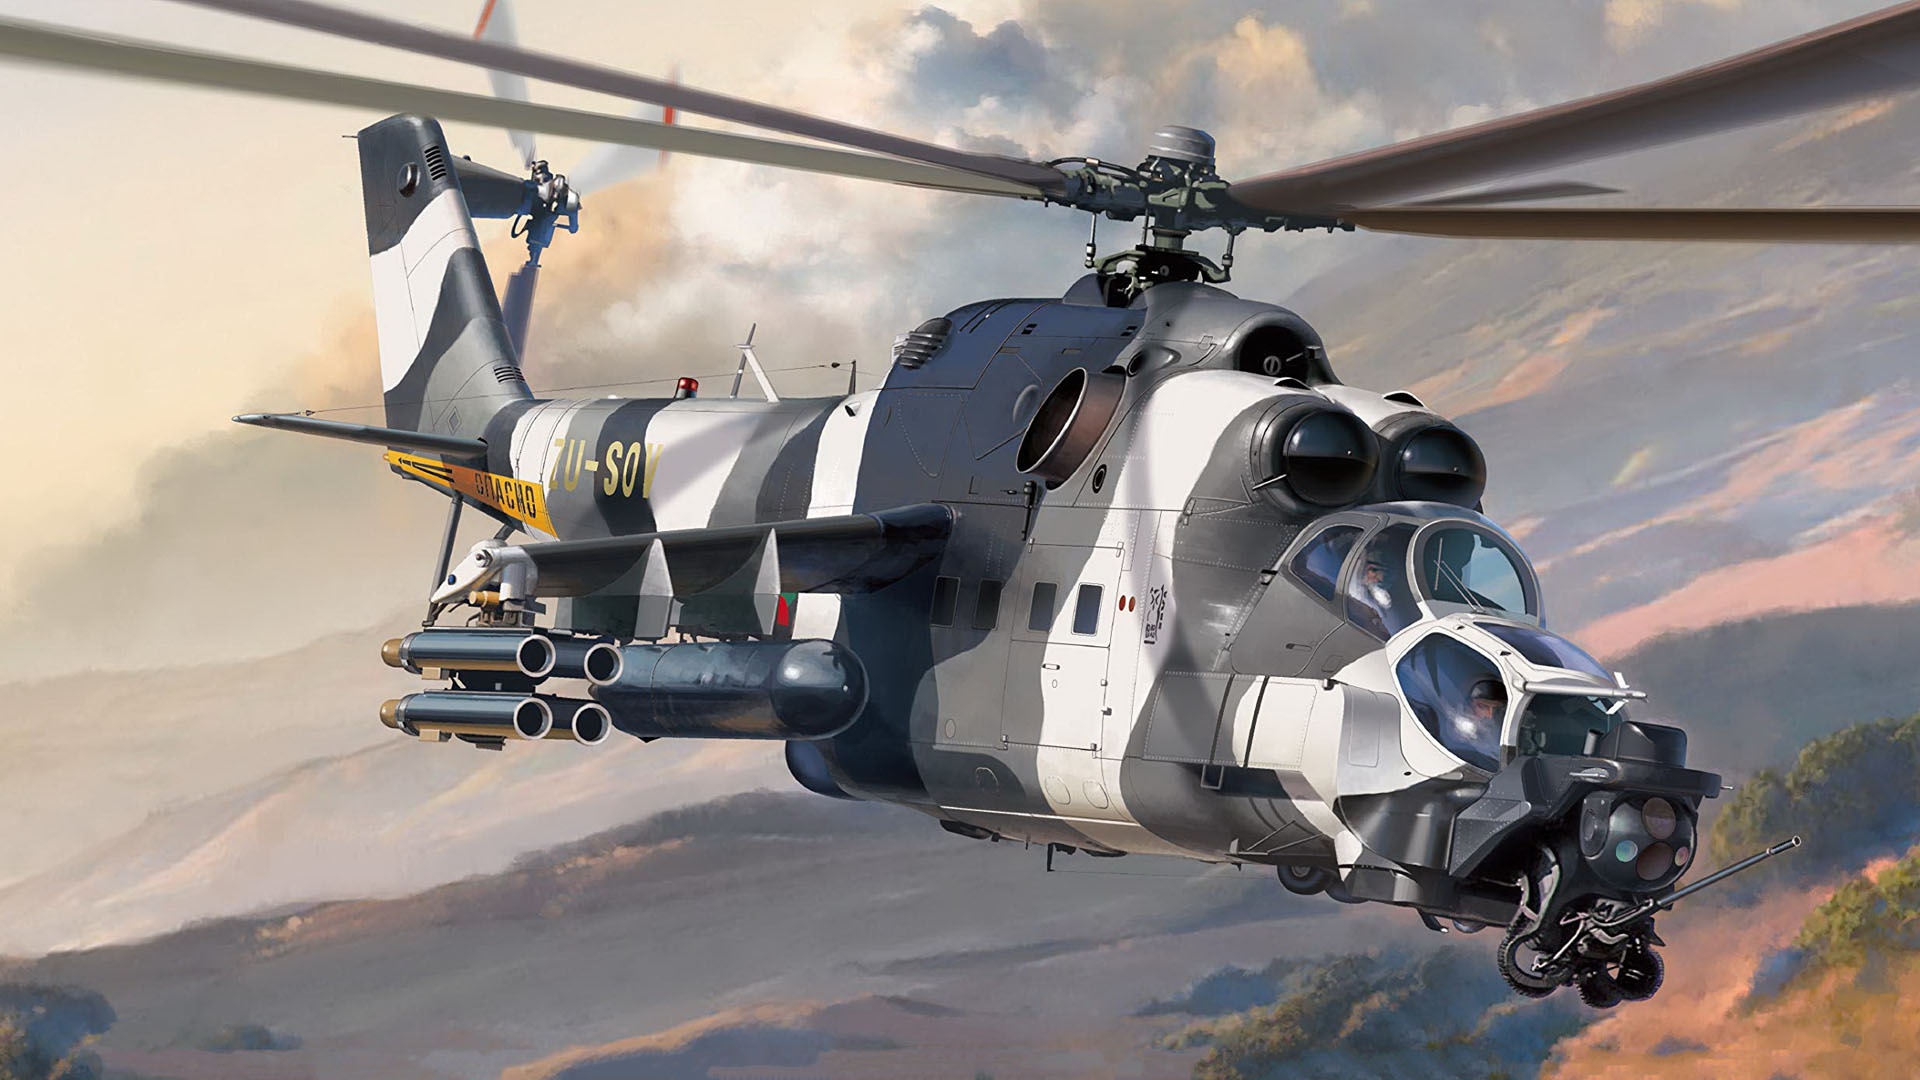 General 1920x1080 aircraft vehicle helicopters military aircraft artwork Mil Mi-35 military vehicle attack helicopters Boxart camouflage Mil Helicopters Russian/Soviet aircraft